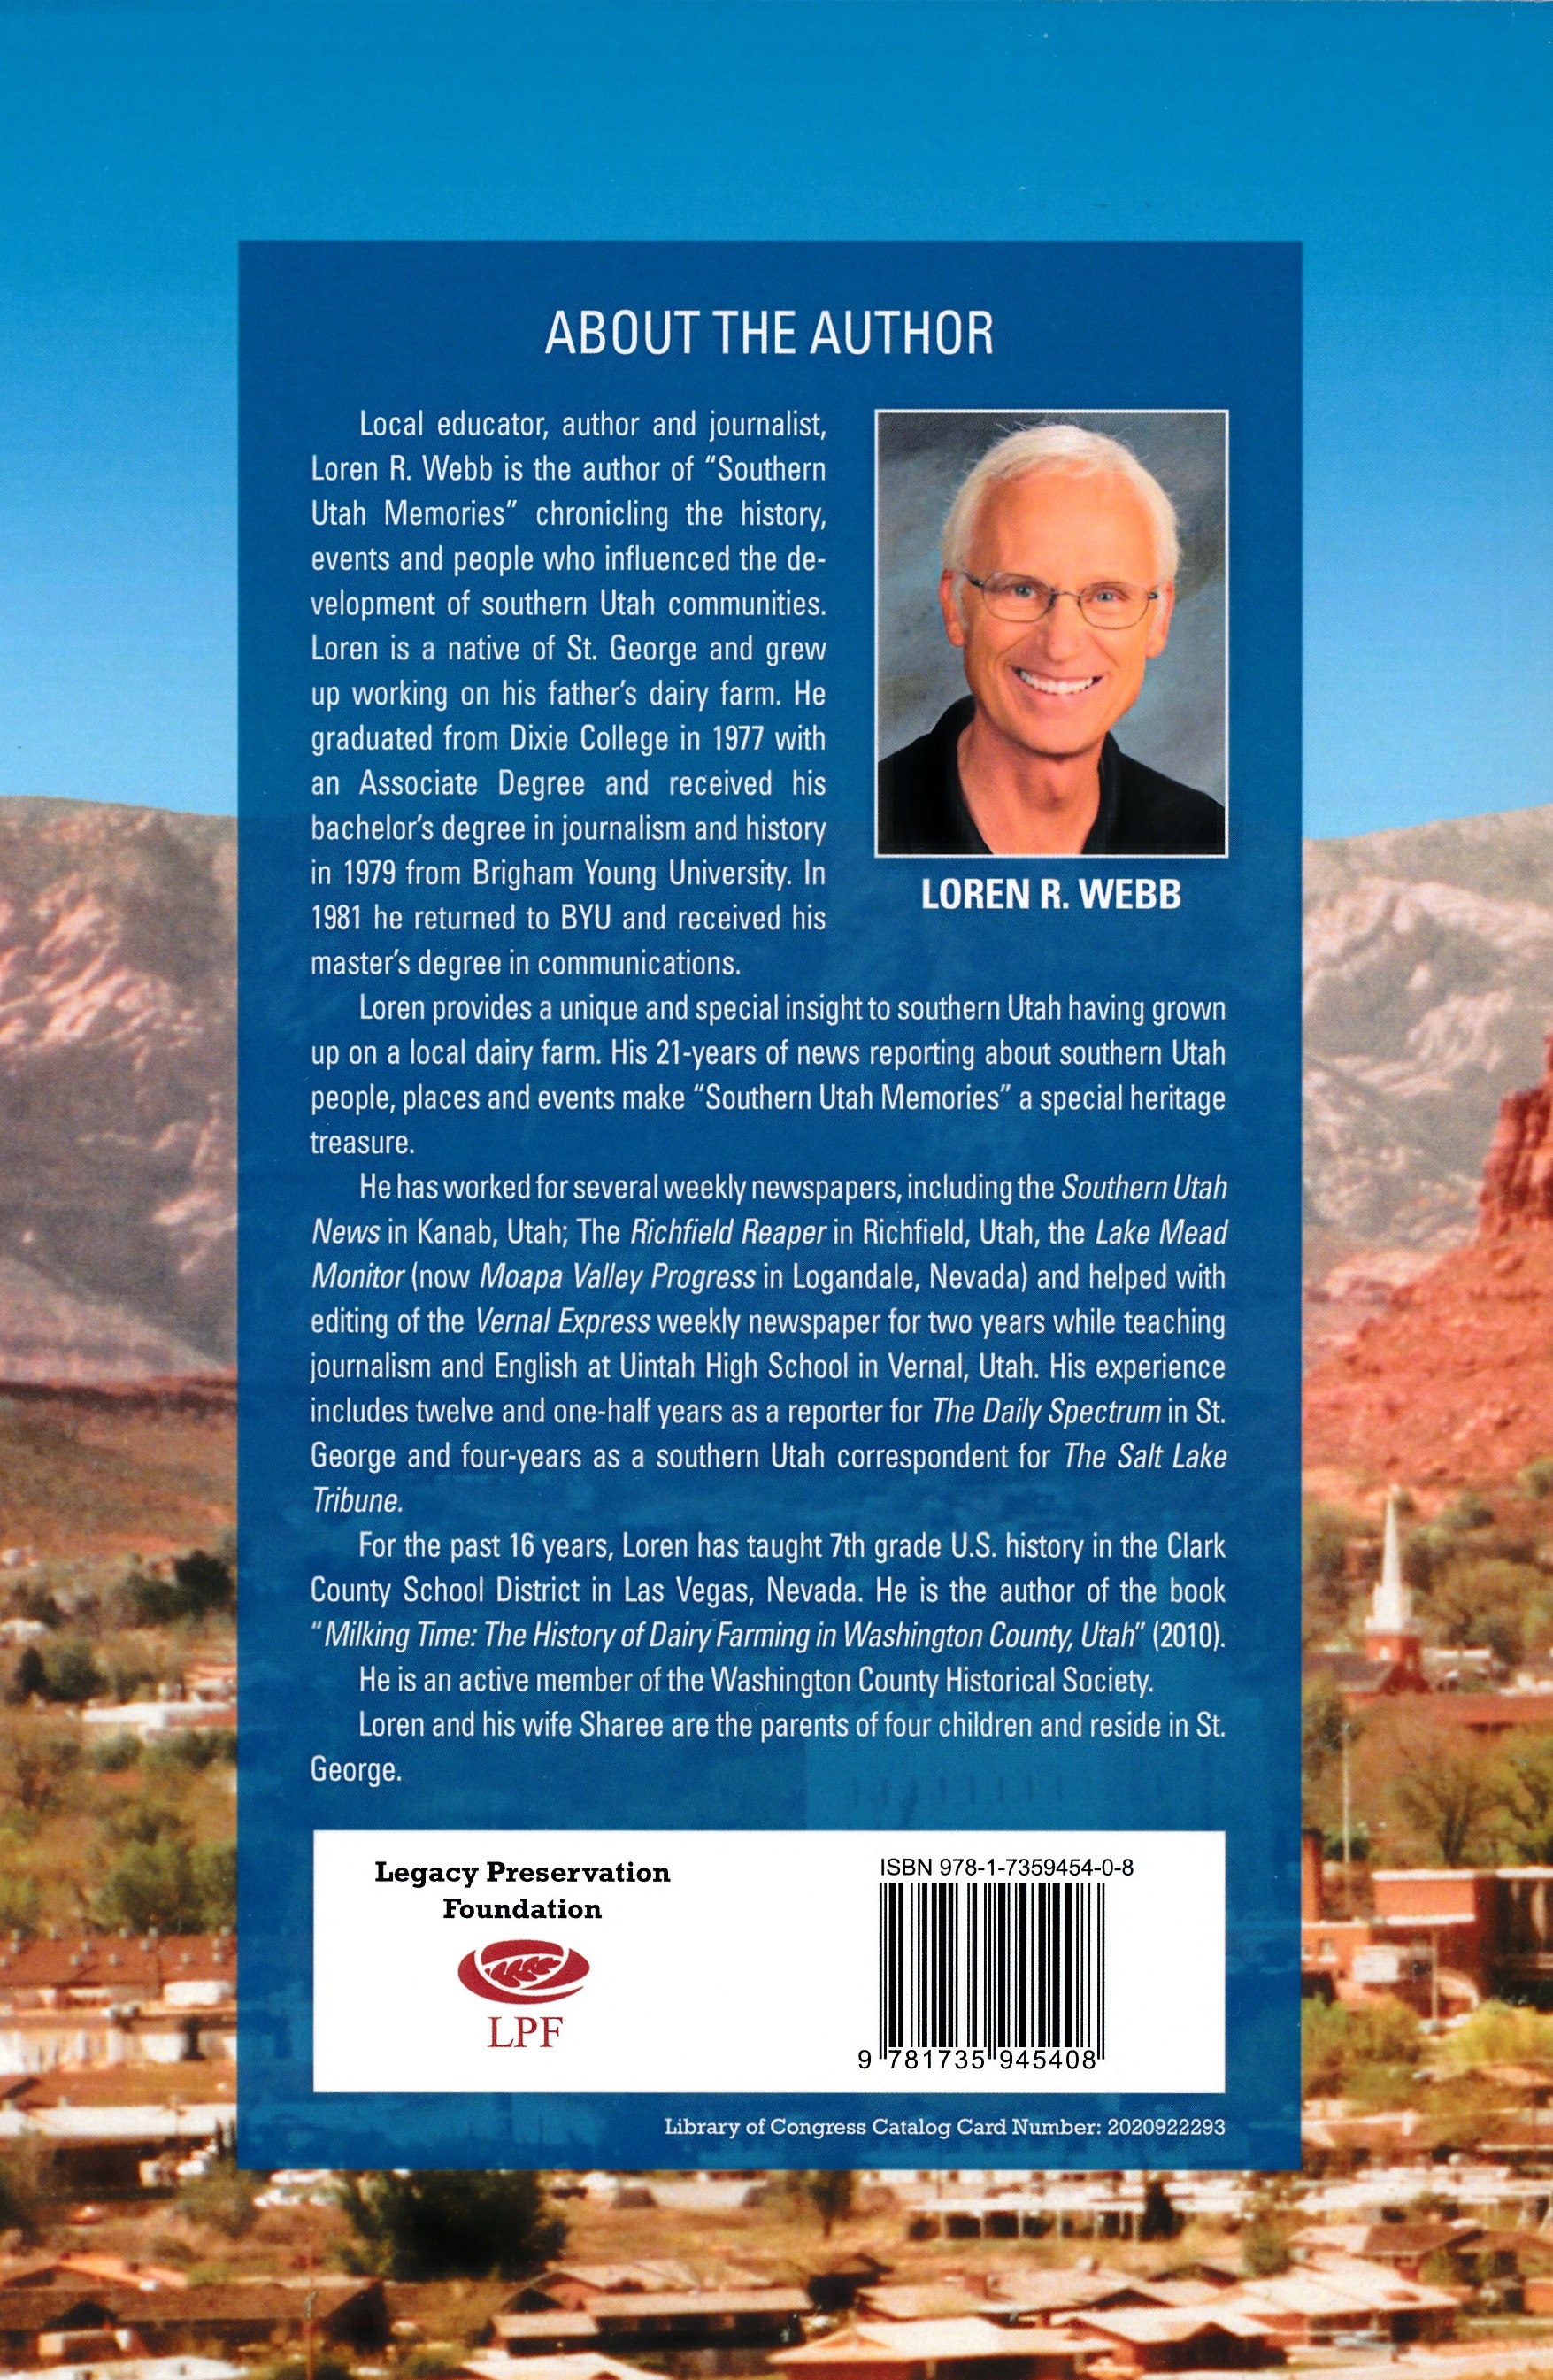 Back cover of the book